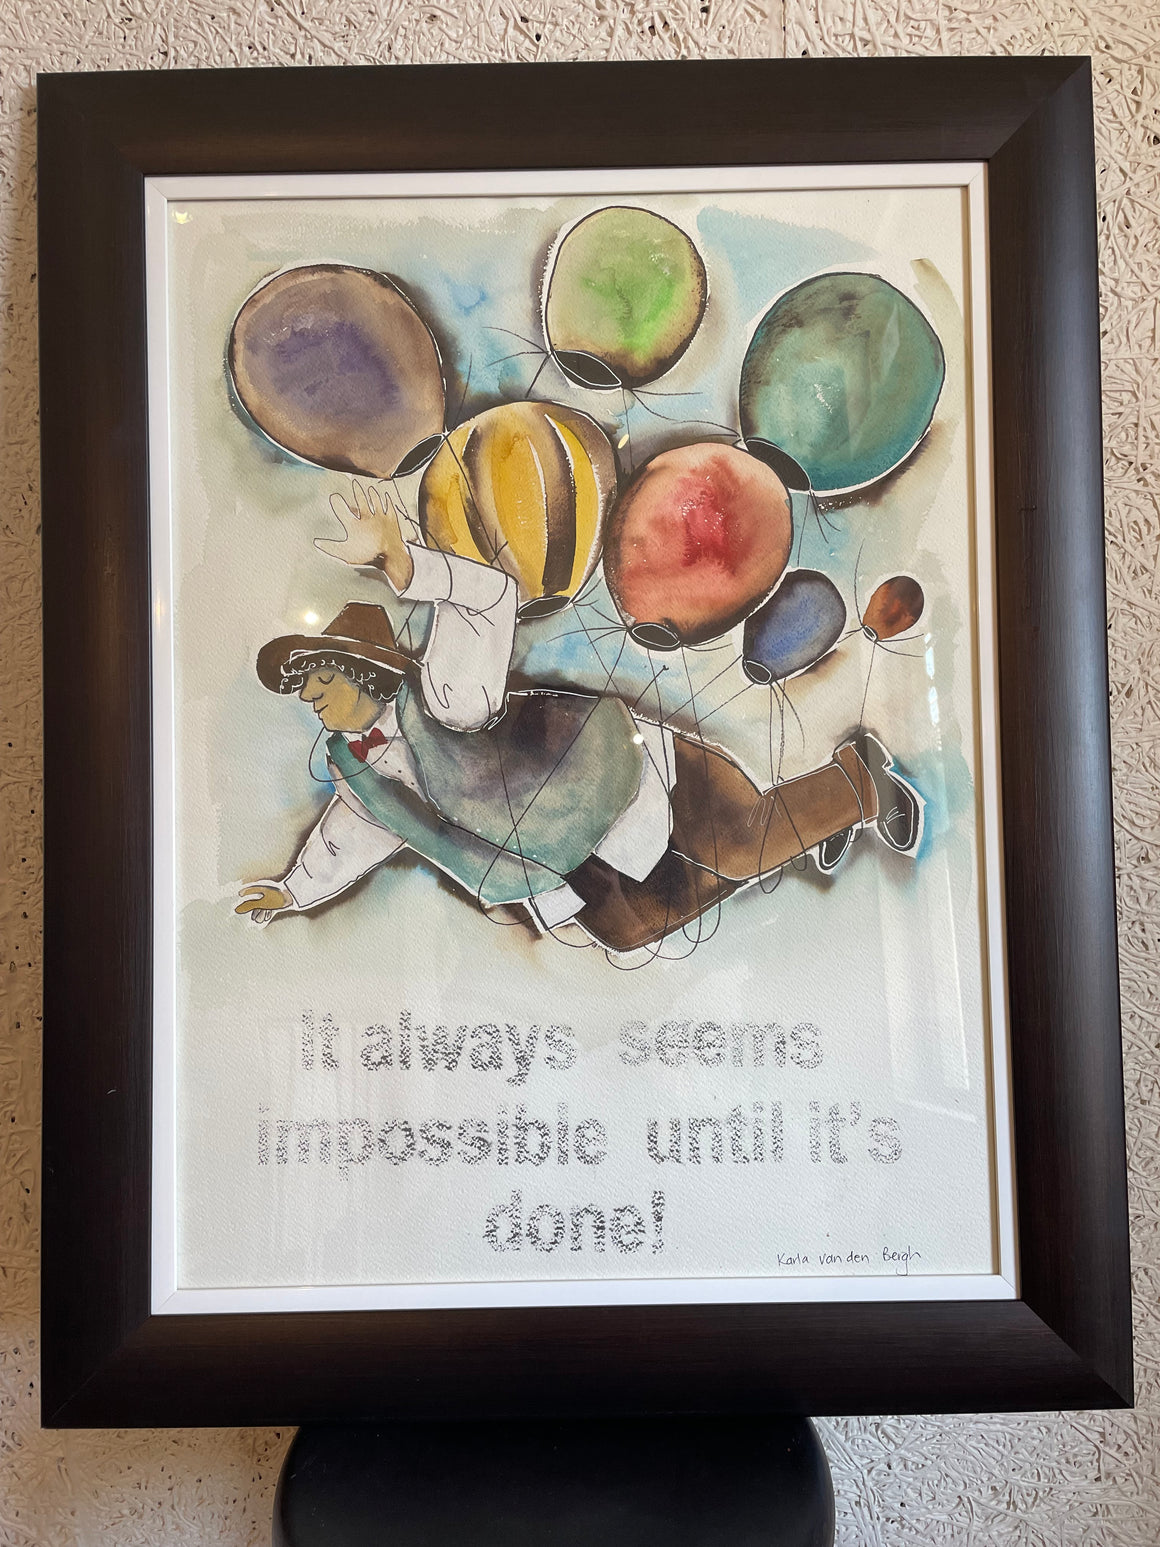 It always seems impossible untill it’s done!